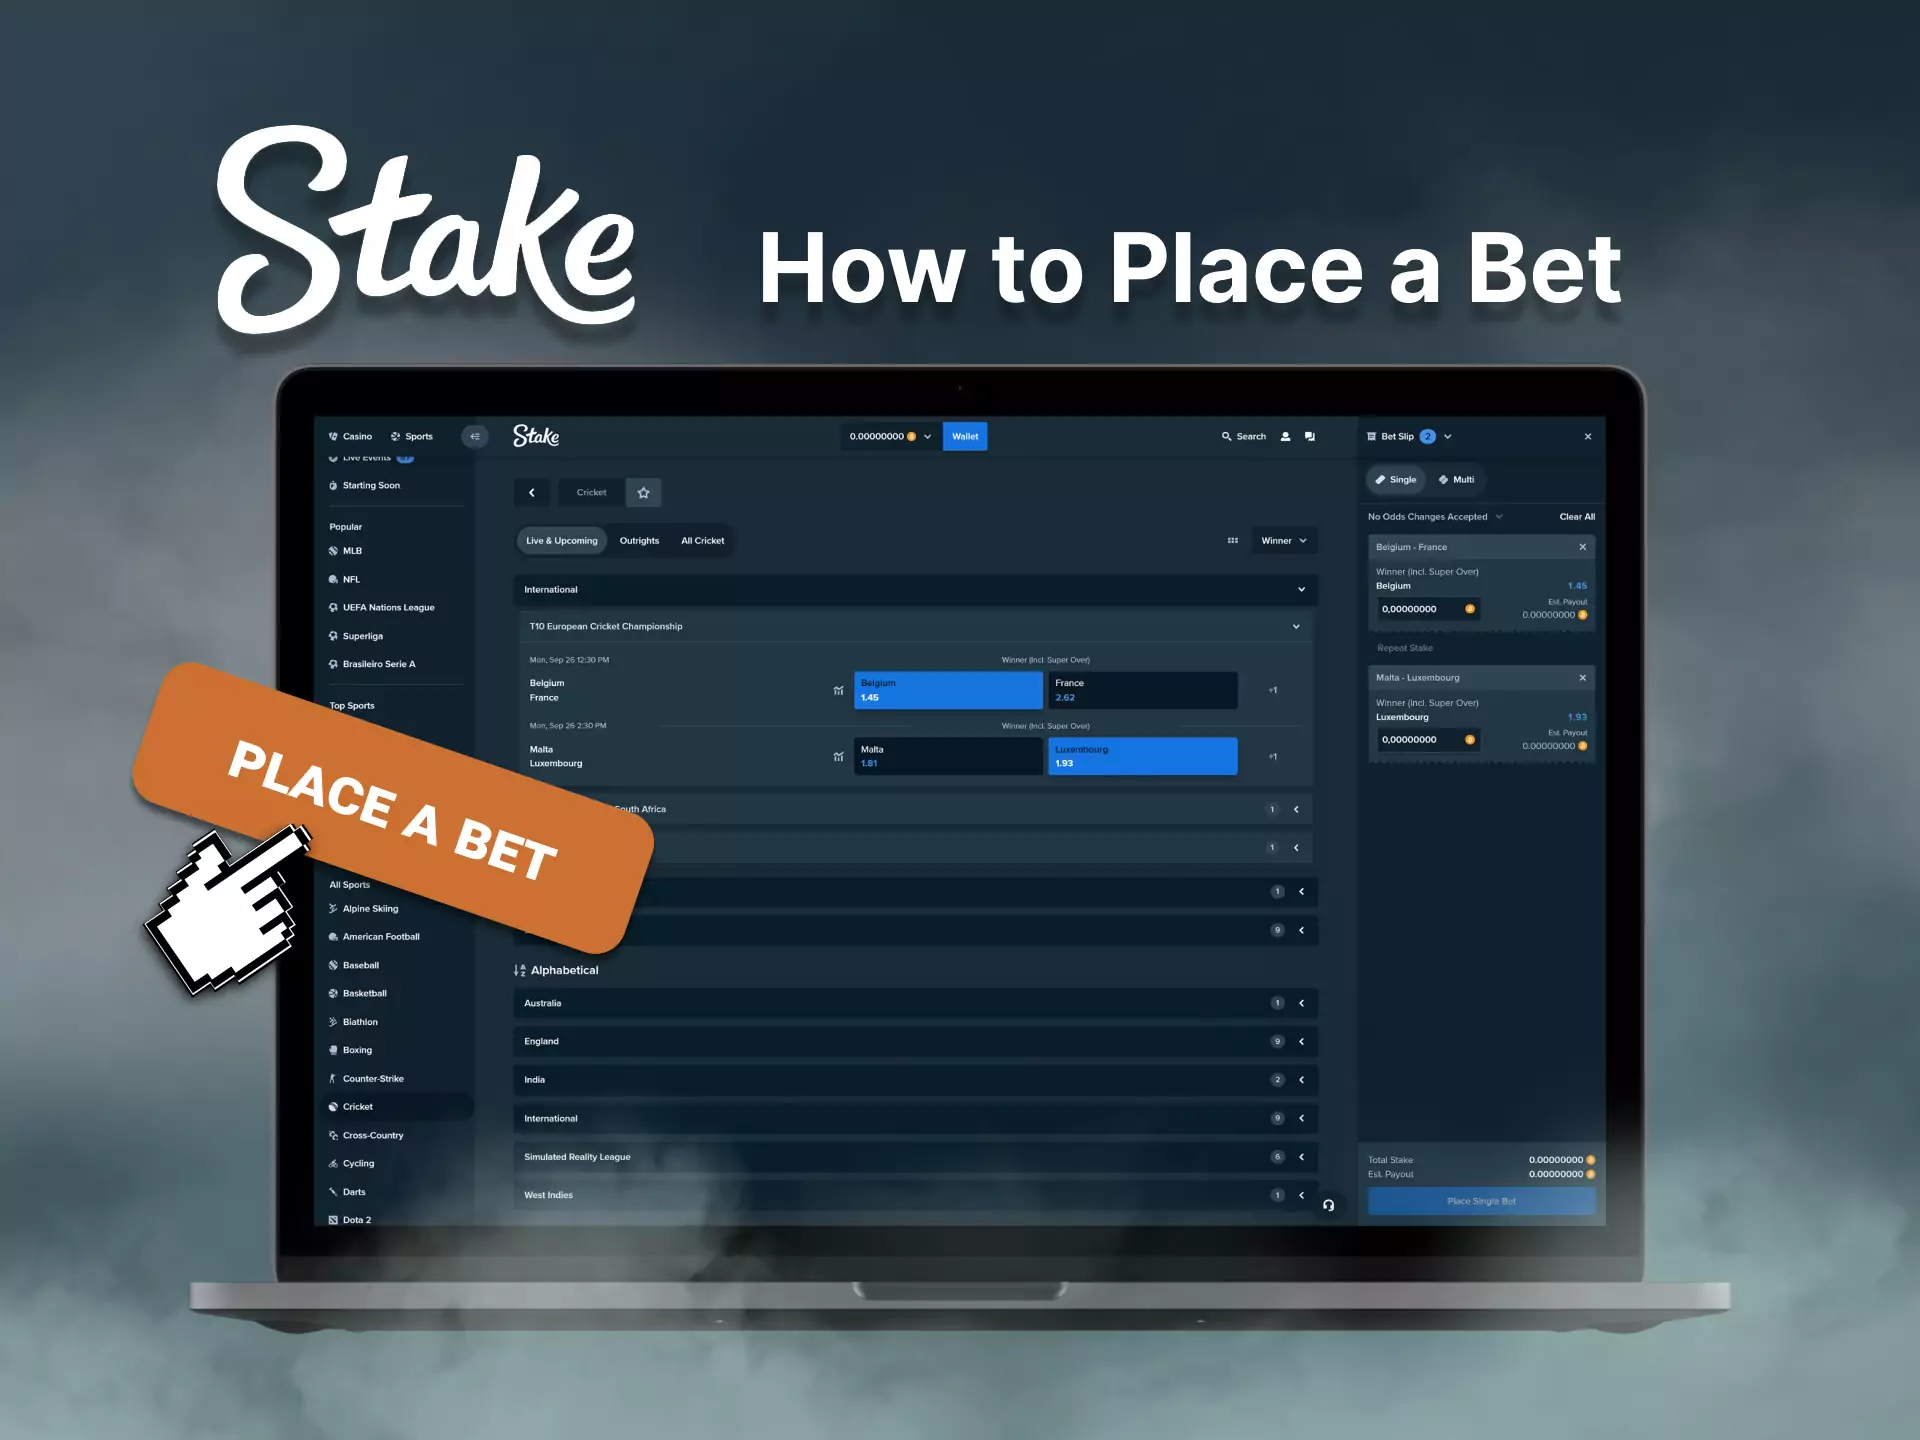 Visit the Stake website, choose a match and place a bet according to your prediction.